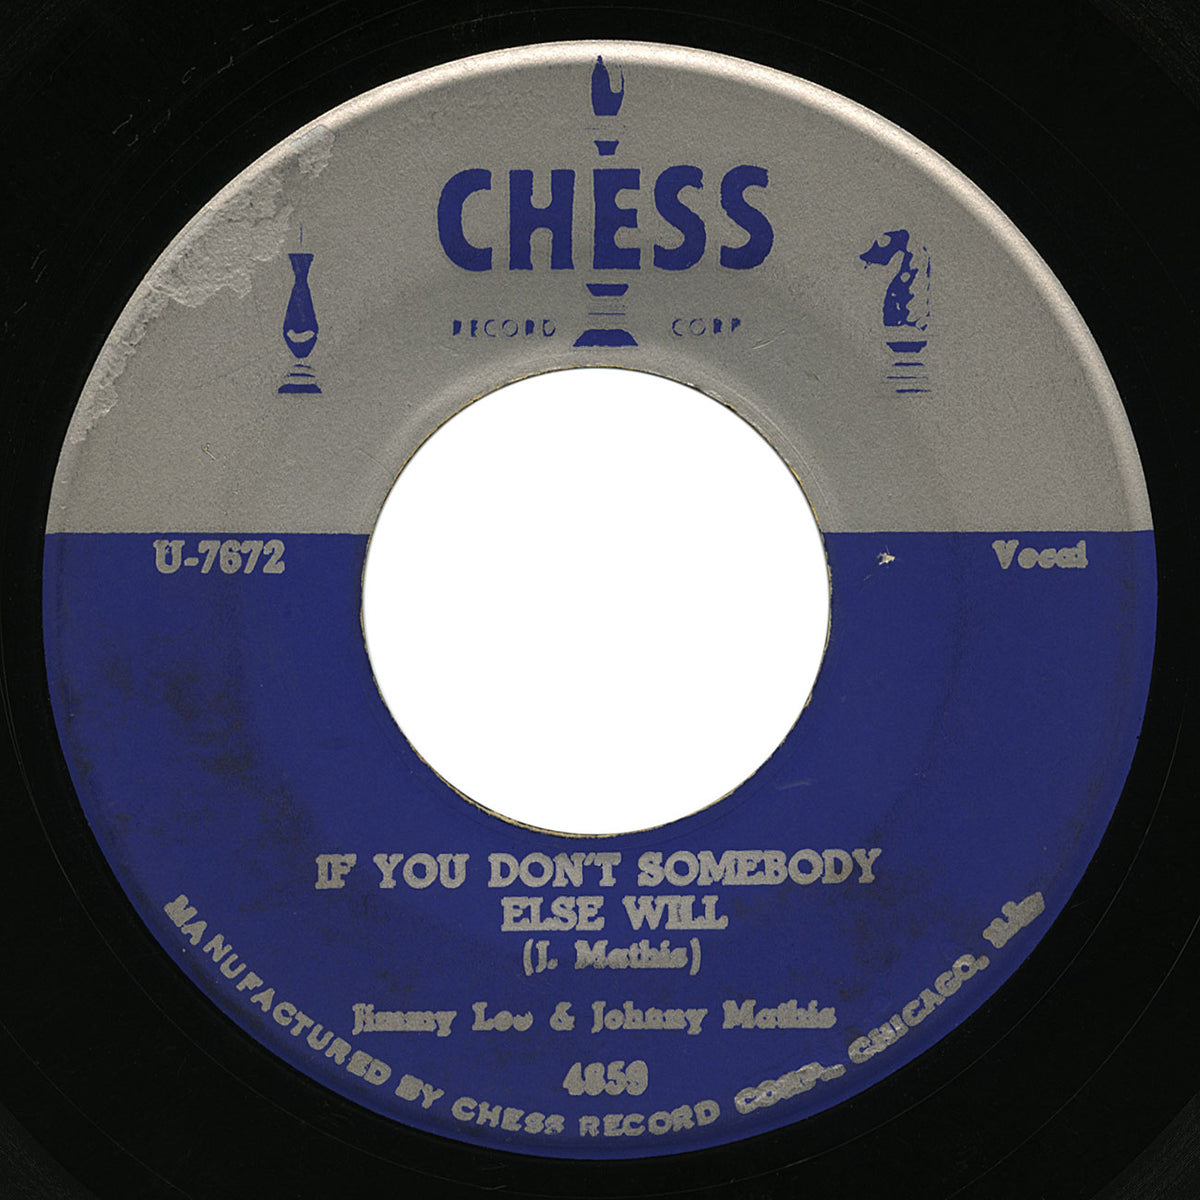 Jimmy Lee & Johnny Mathis – If You Don’t Somebody Else Will – Chess